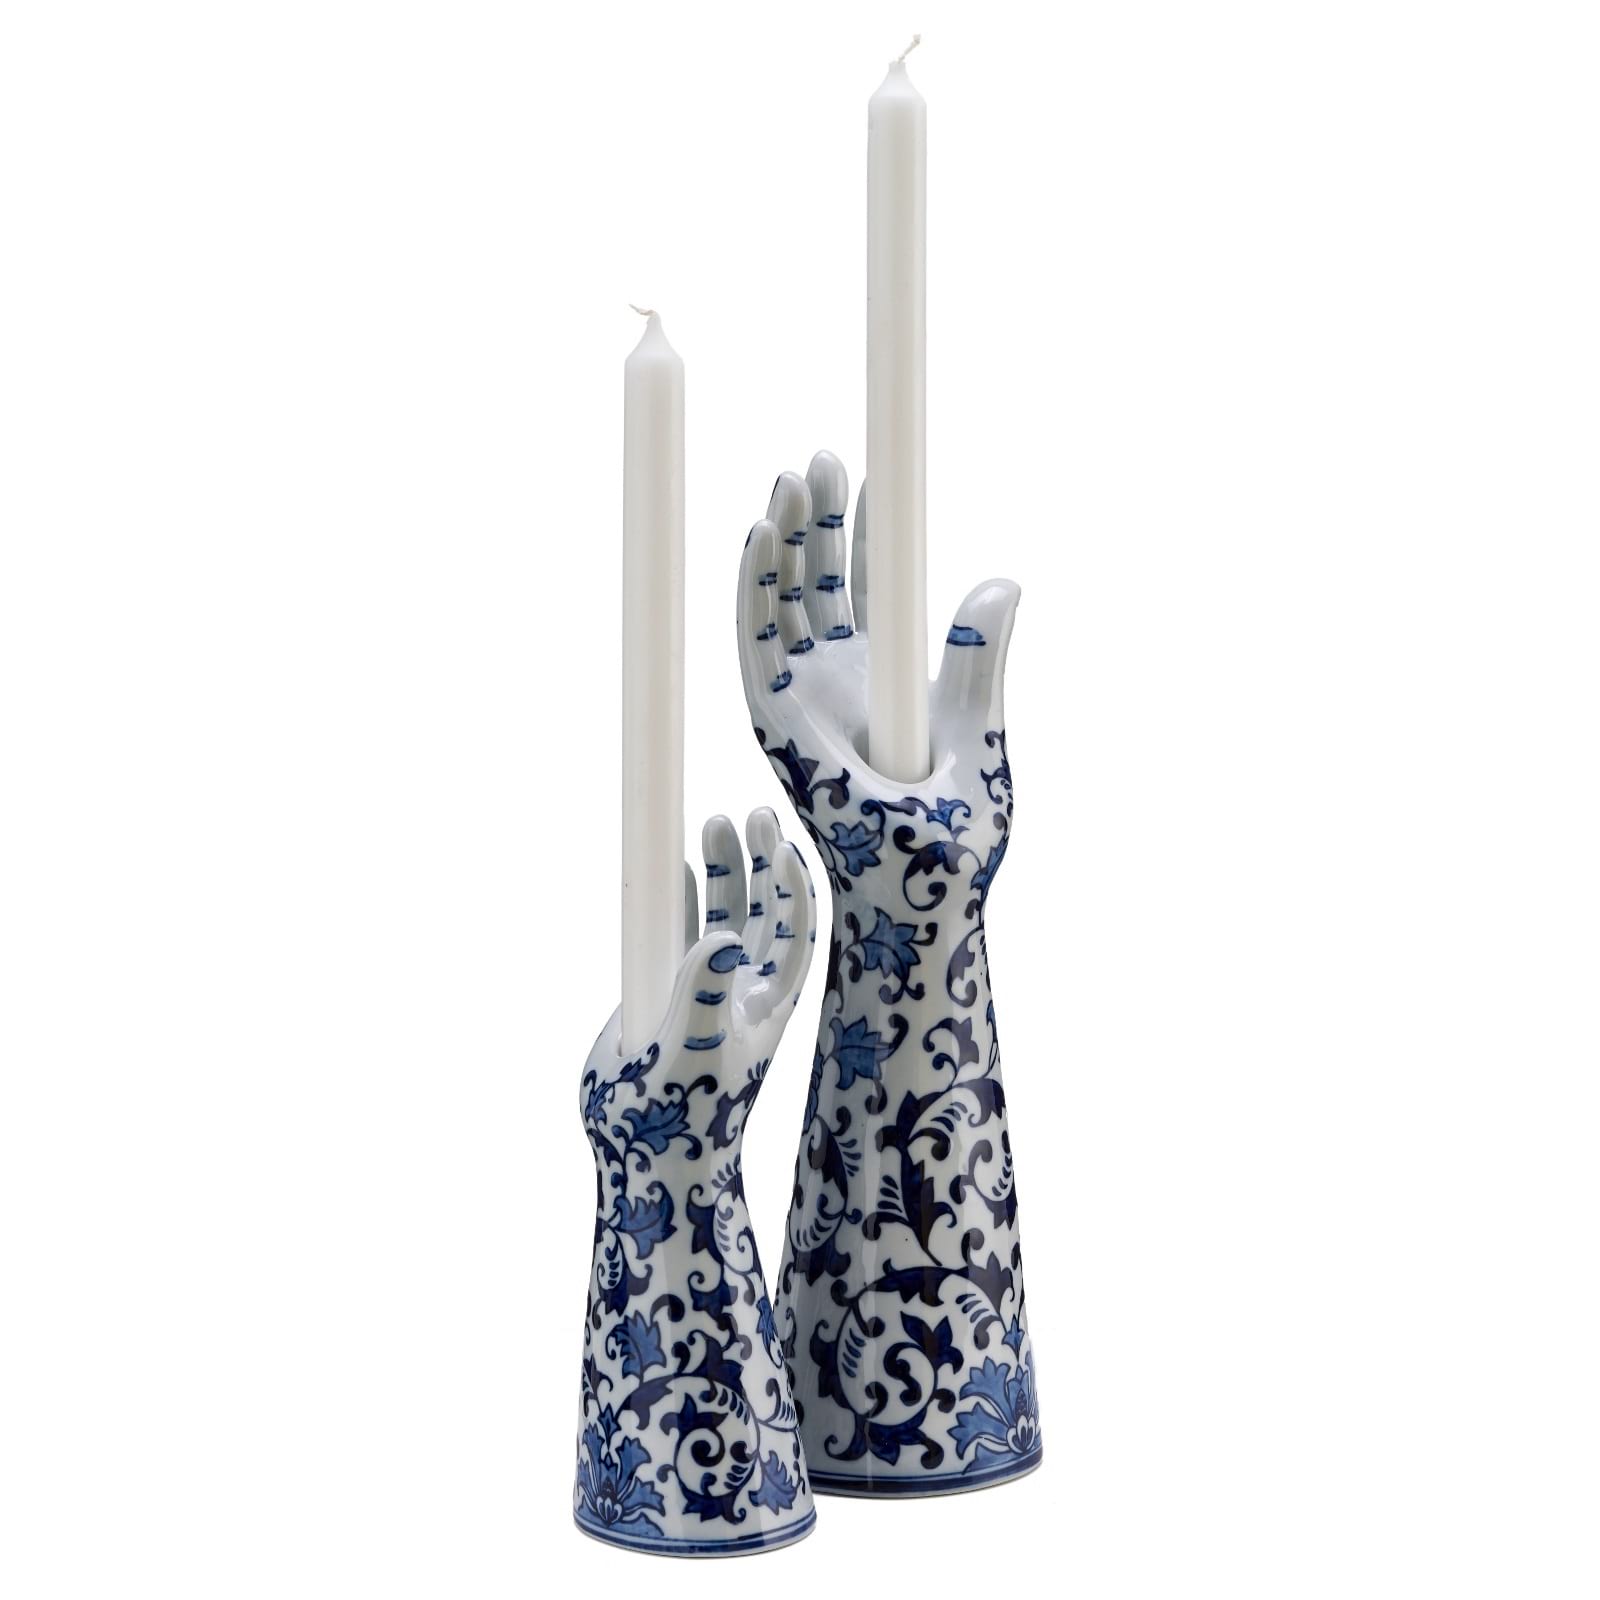 Candle holder handsup! S